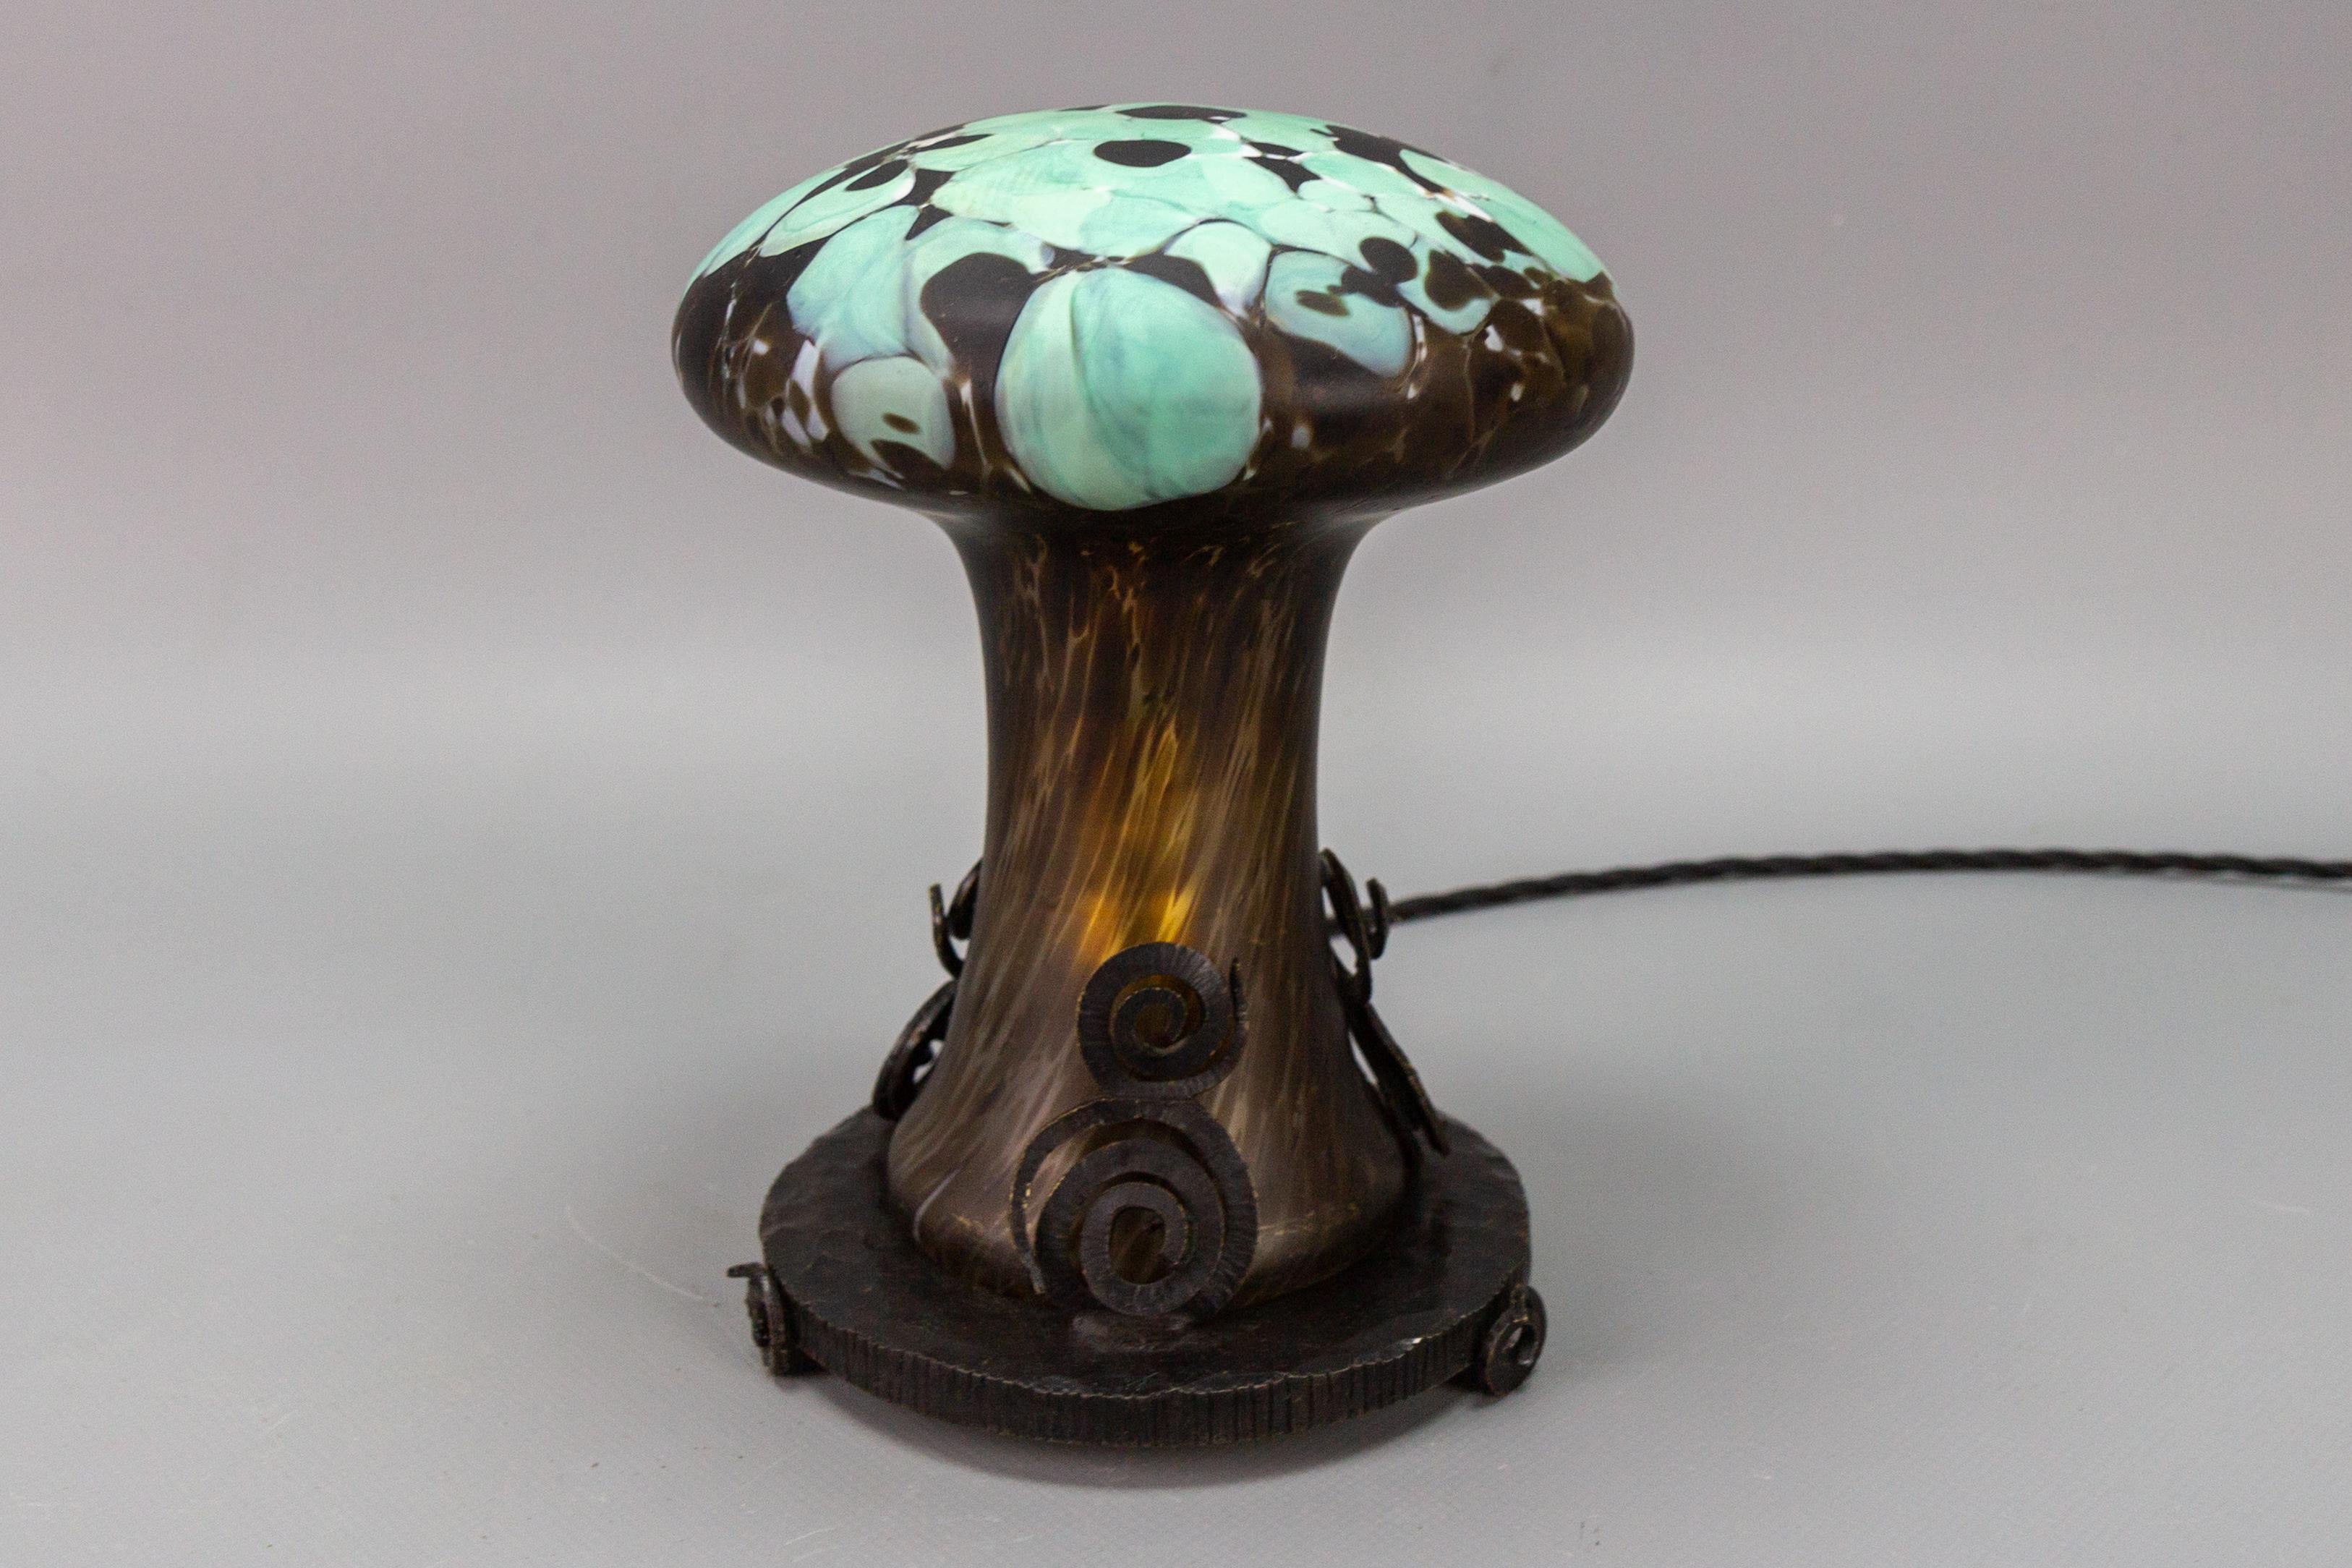 French Art Deco style Wrought Iron and art glass table lamp in the shape of a mushroom, circa the 1950s.
An adorable and cute Art Deco style wrought iron base table lamp with light turquoise and dark brown color mushroom-shaped art glass body. The